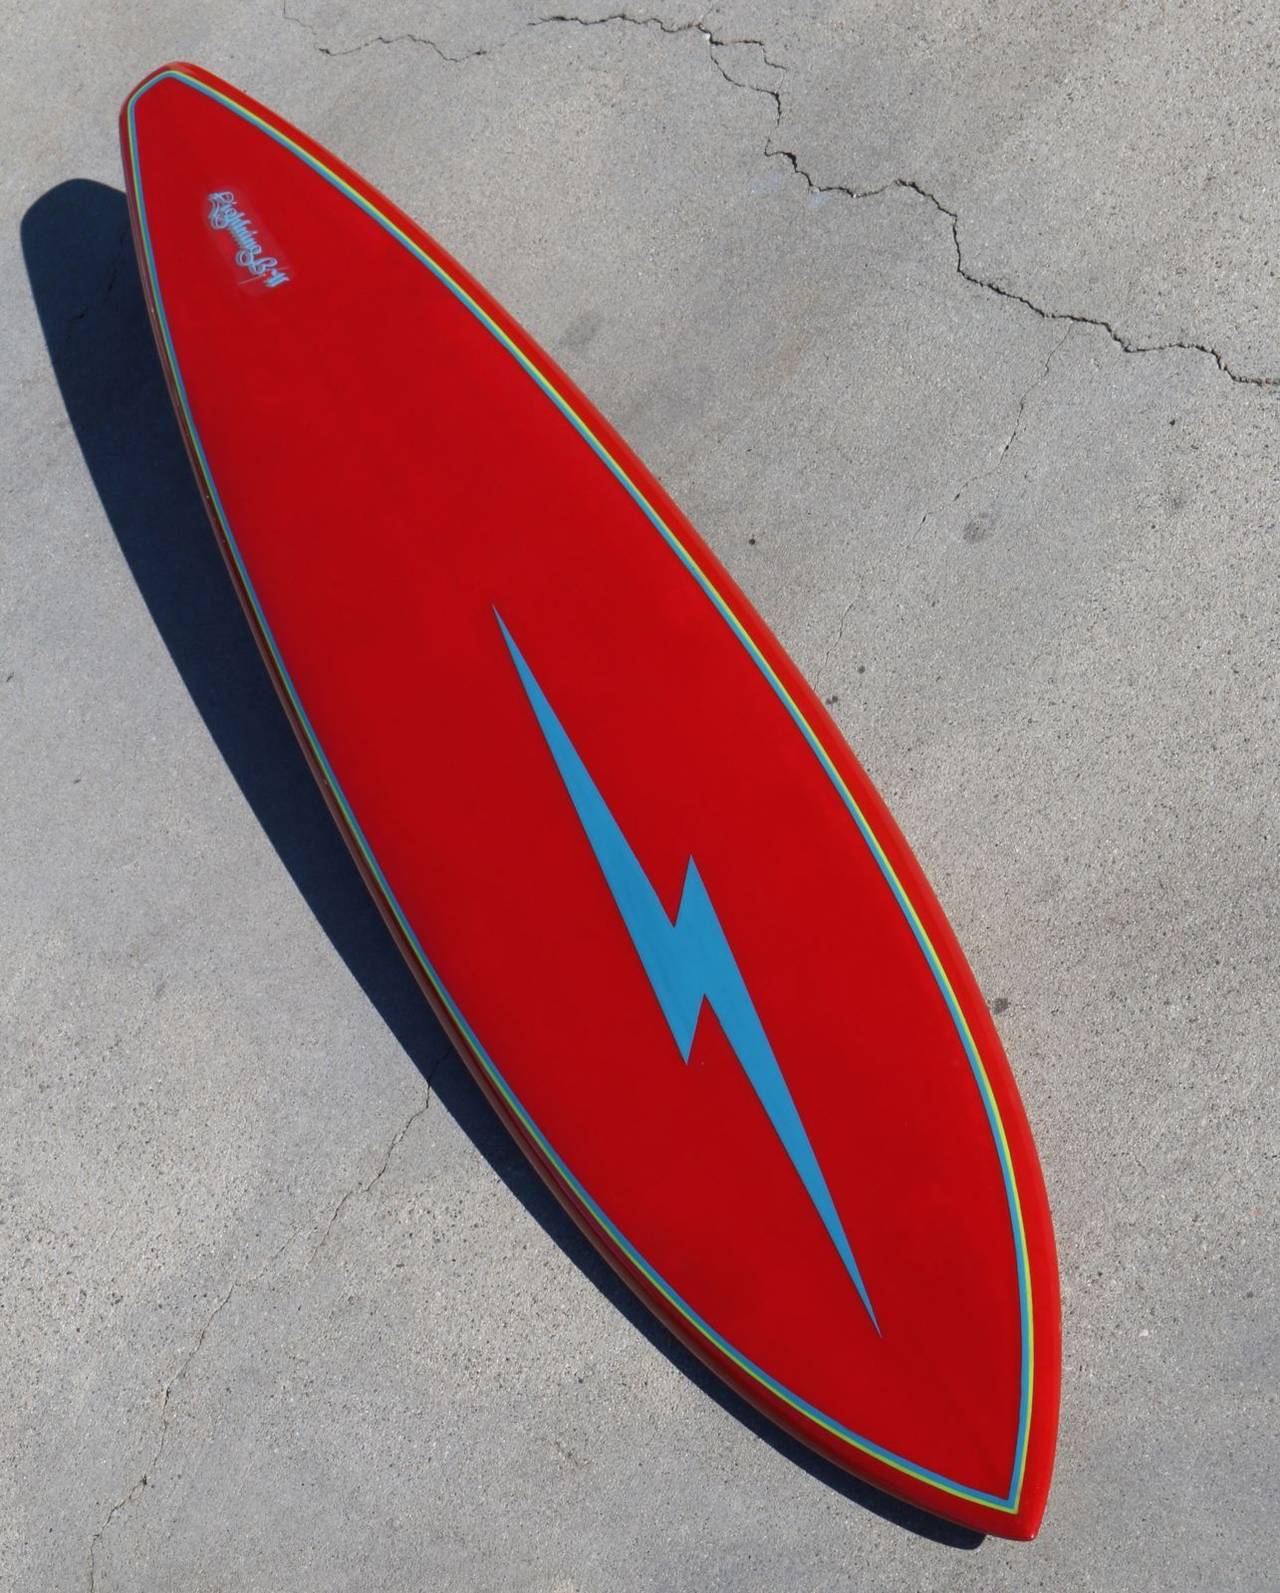 This is a fully restored 1970s surfboard with lightning bolt logo and original fin. Vibrant red deck has sky blue bolt, logo and blue and chartreuse pinstripes creating an eye-catching color combination full of verve. The bottom is the same vibrant